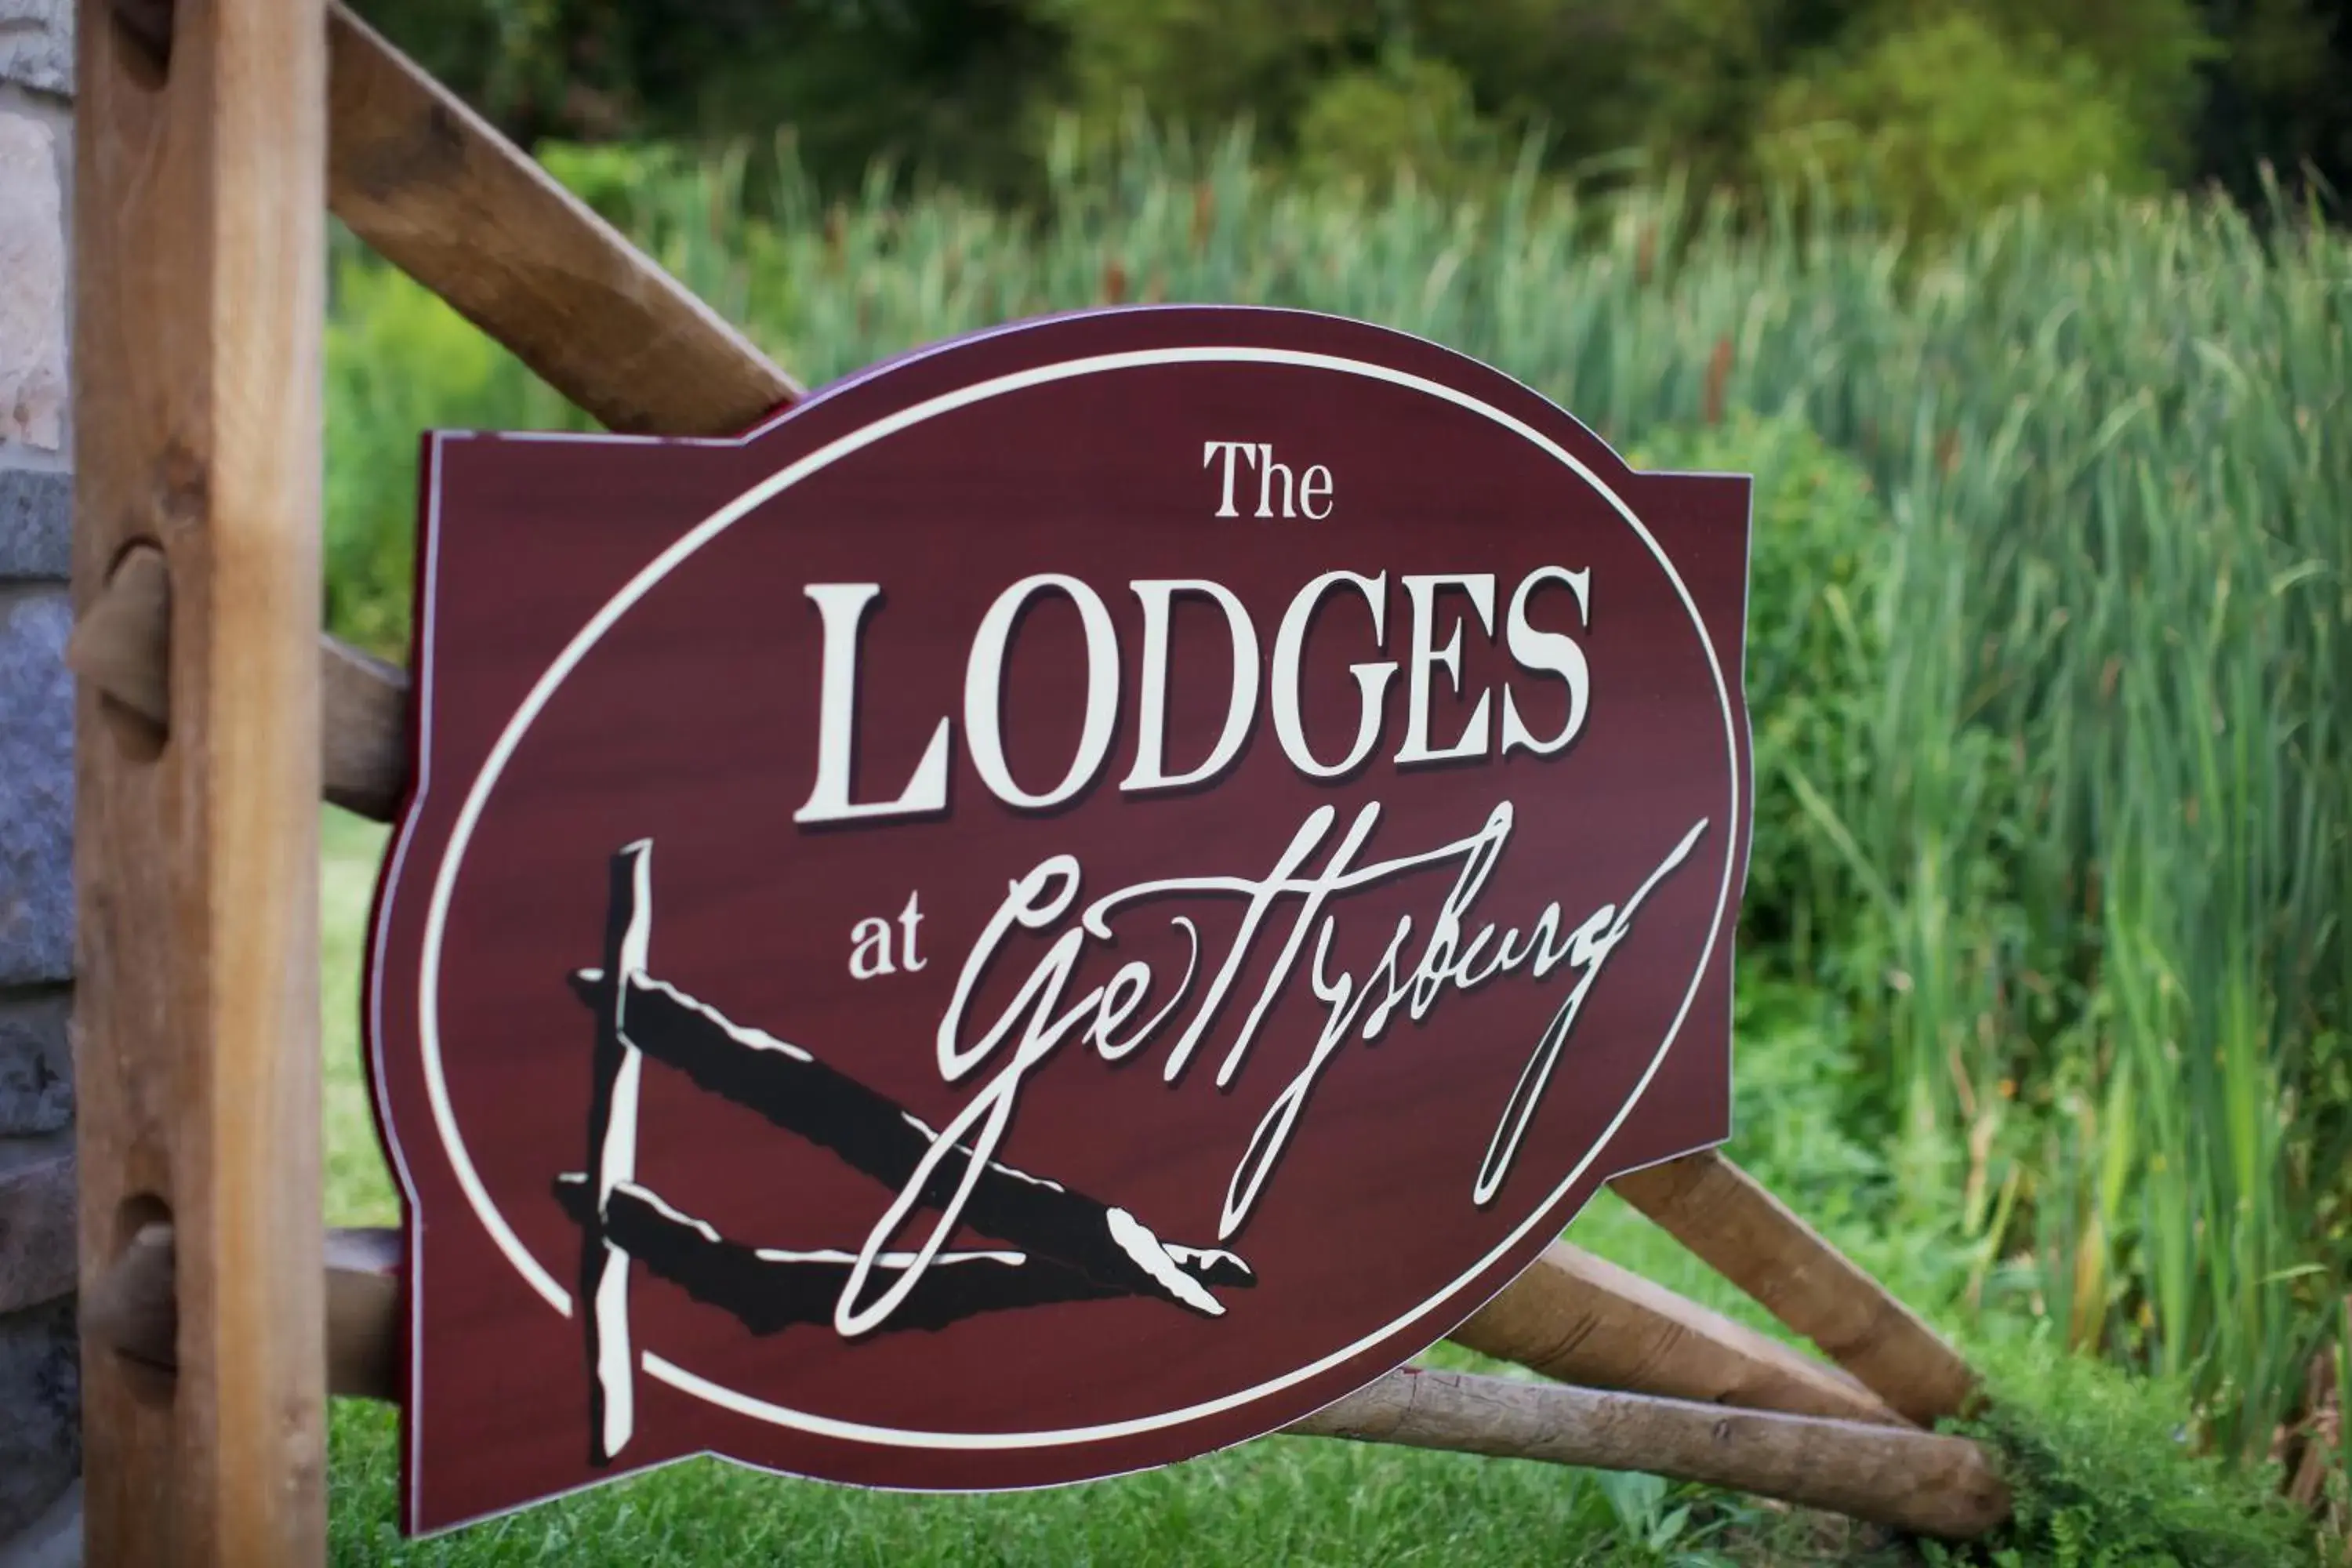 Property logo or sign in The Lodges At Gettysburg